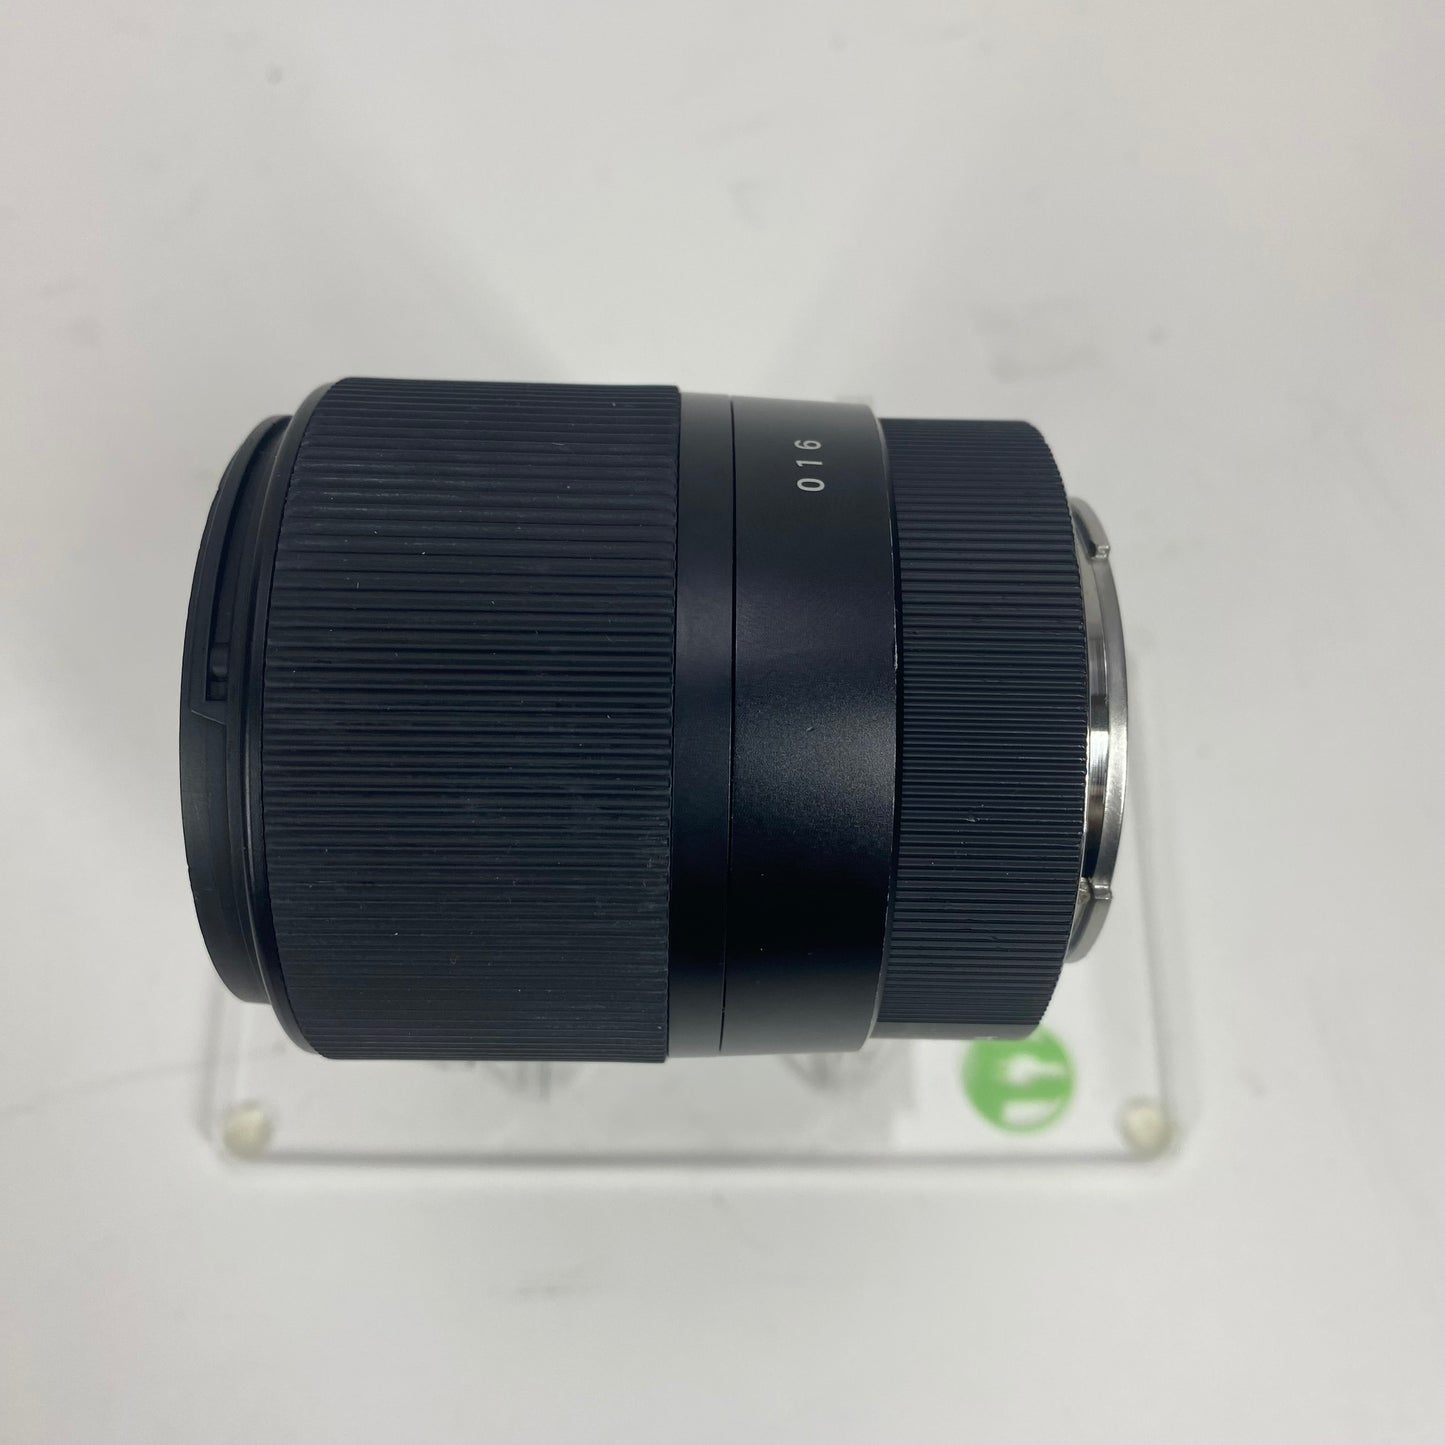 Sigma DC DN 52 30mm f/1.4 For Sony E-Mount